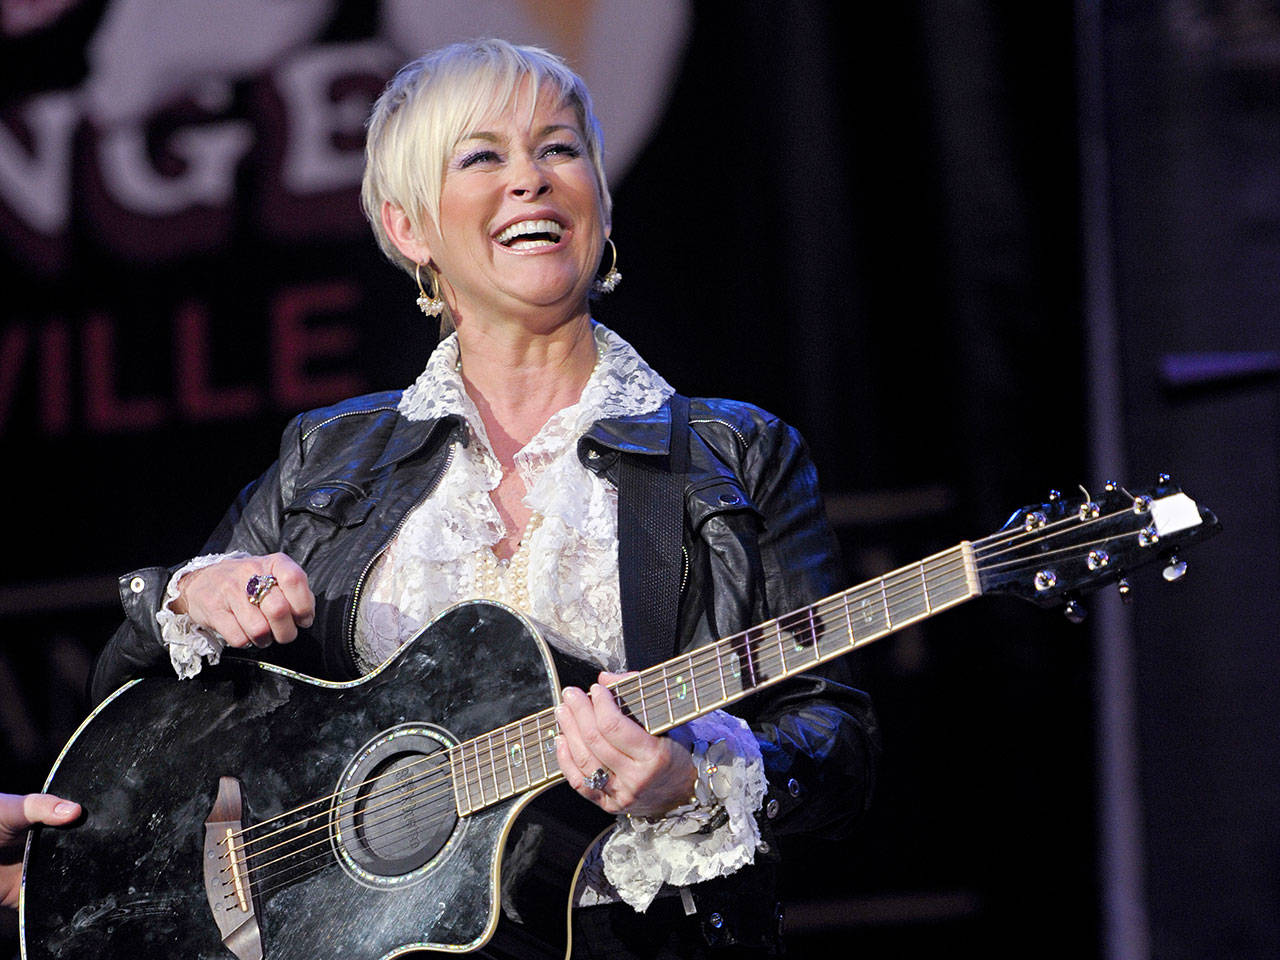 Lorrie Morgan is scheduled to perform July 2 at Edmonds Center for the Arts. (Associated Press)